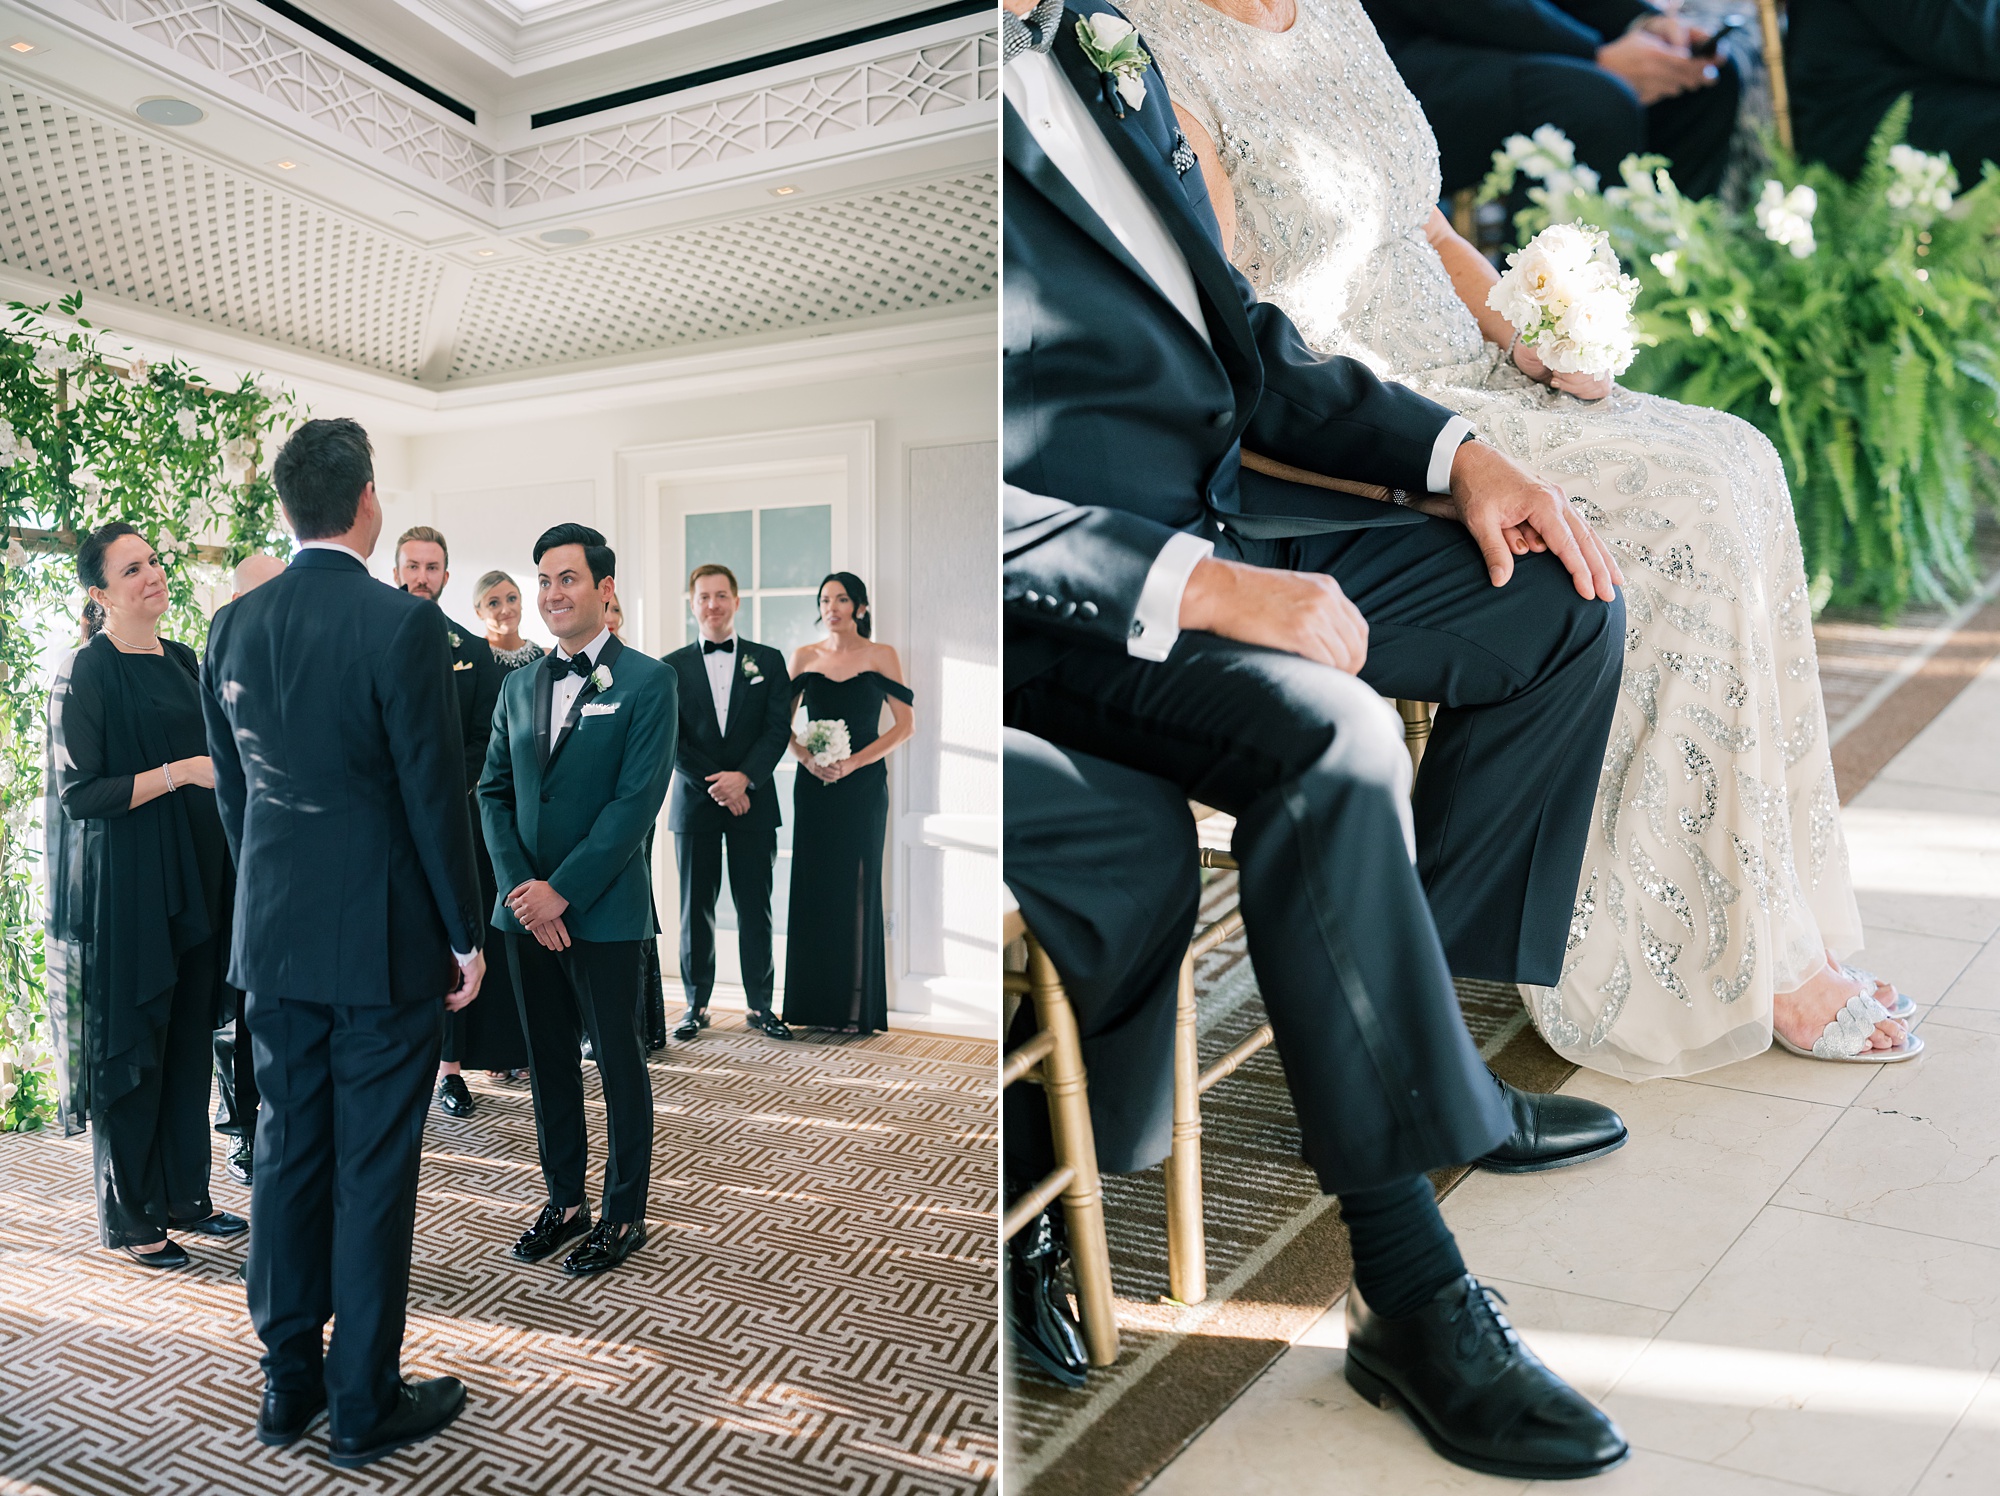 grooms stand together during vows throughout ceremony at the Hay Adams Hotel